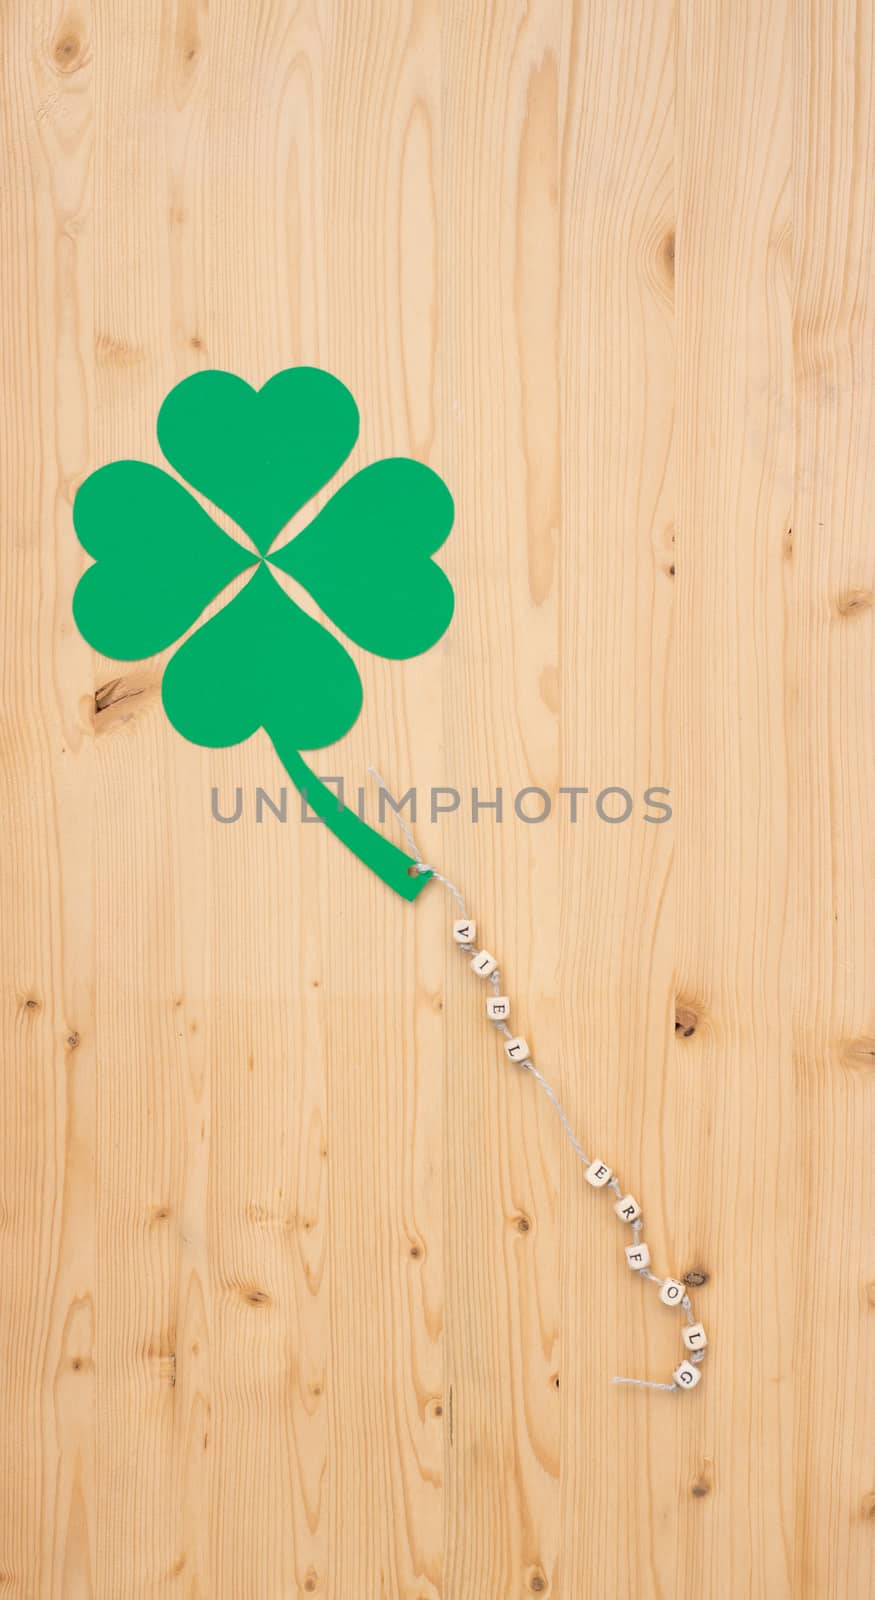 The german words for lot of success and a cloverleaf on a cord on wood